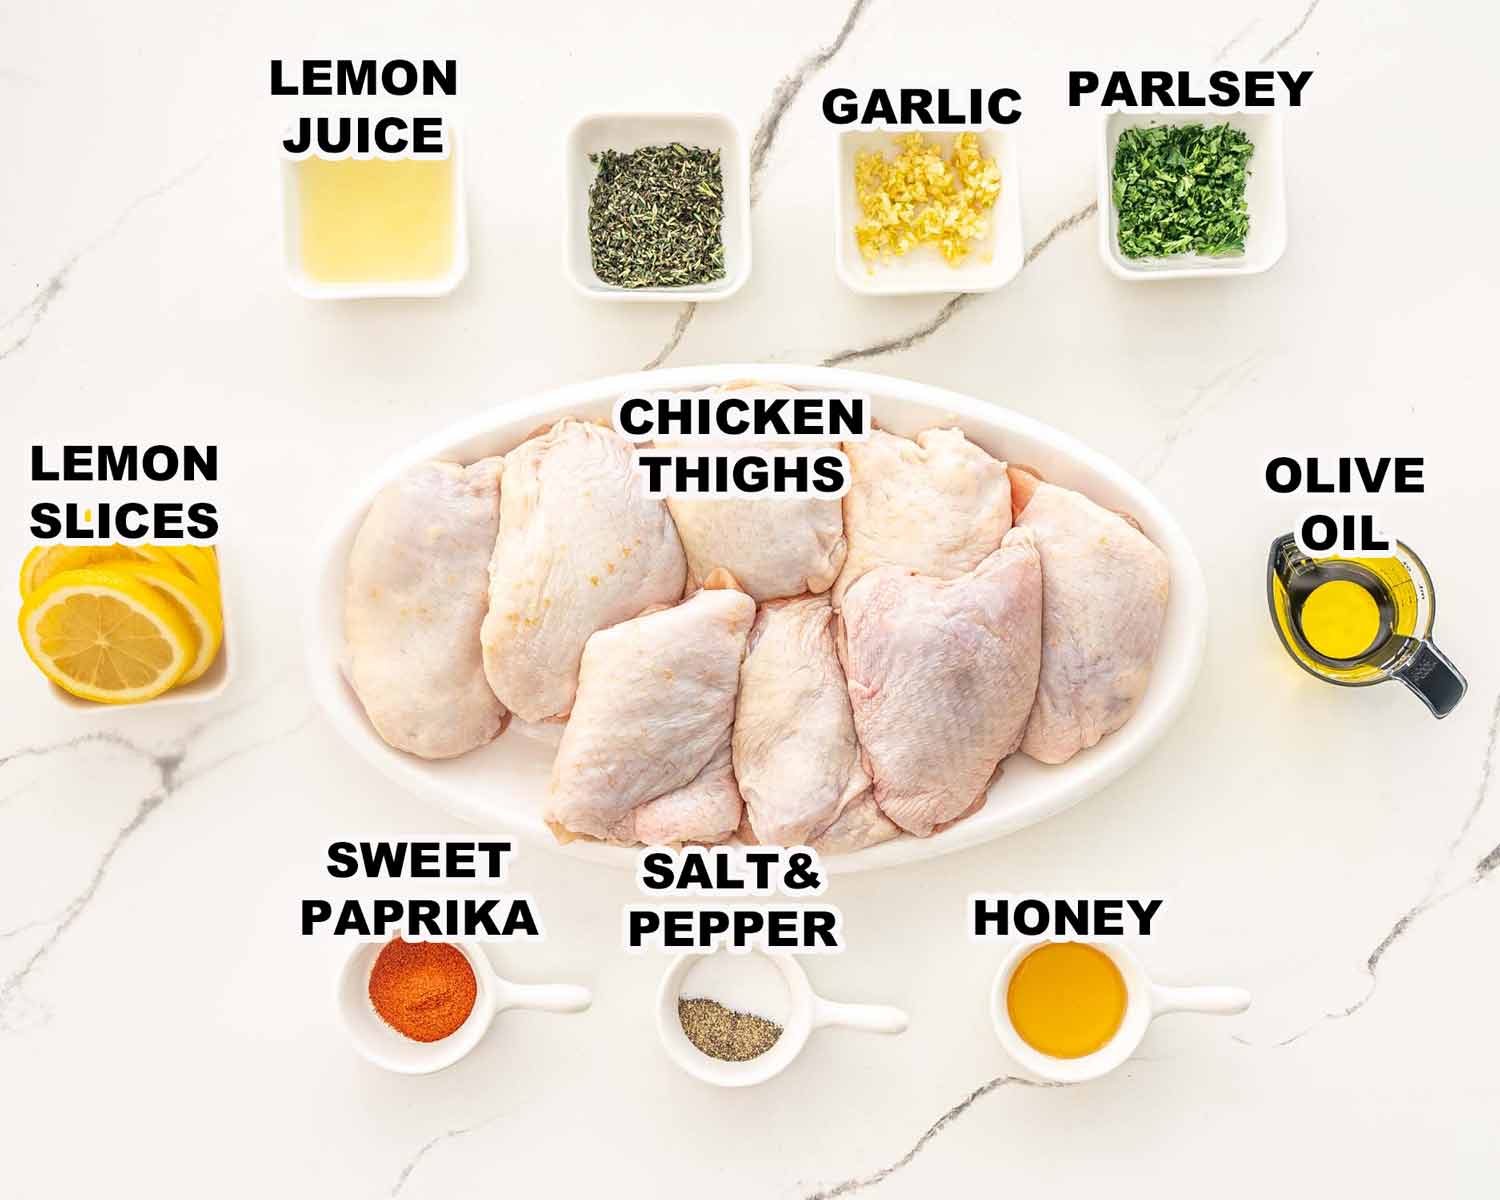 ingredients needed to make baked lemon chicken thighs.